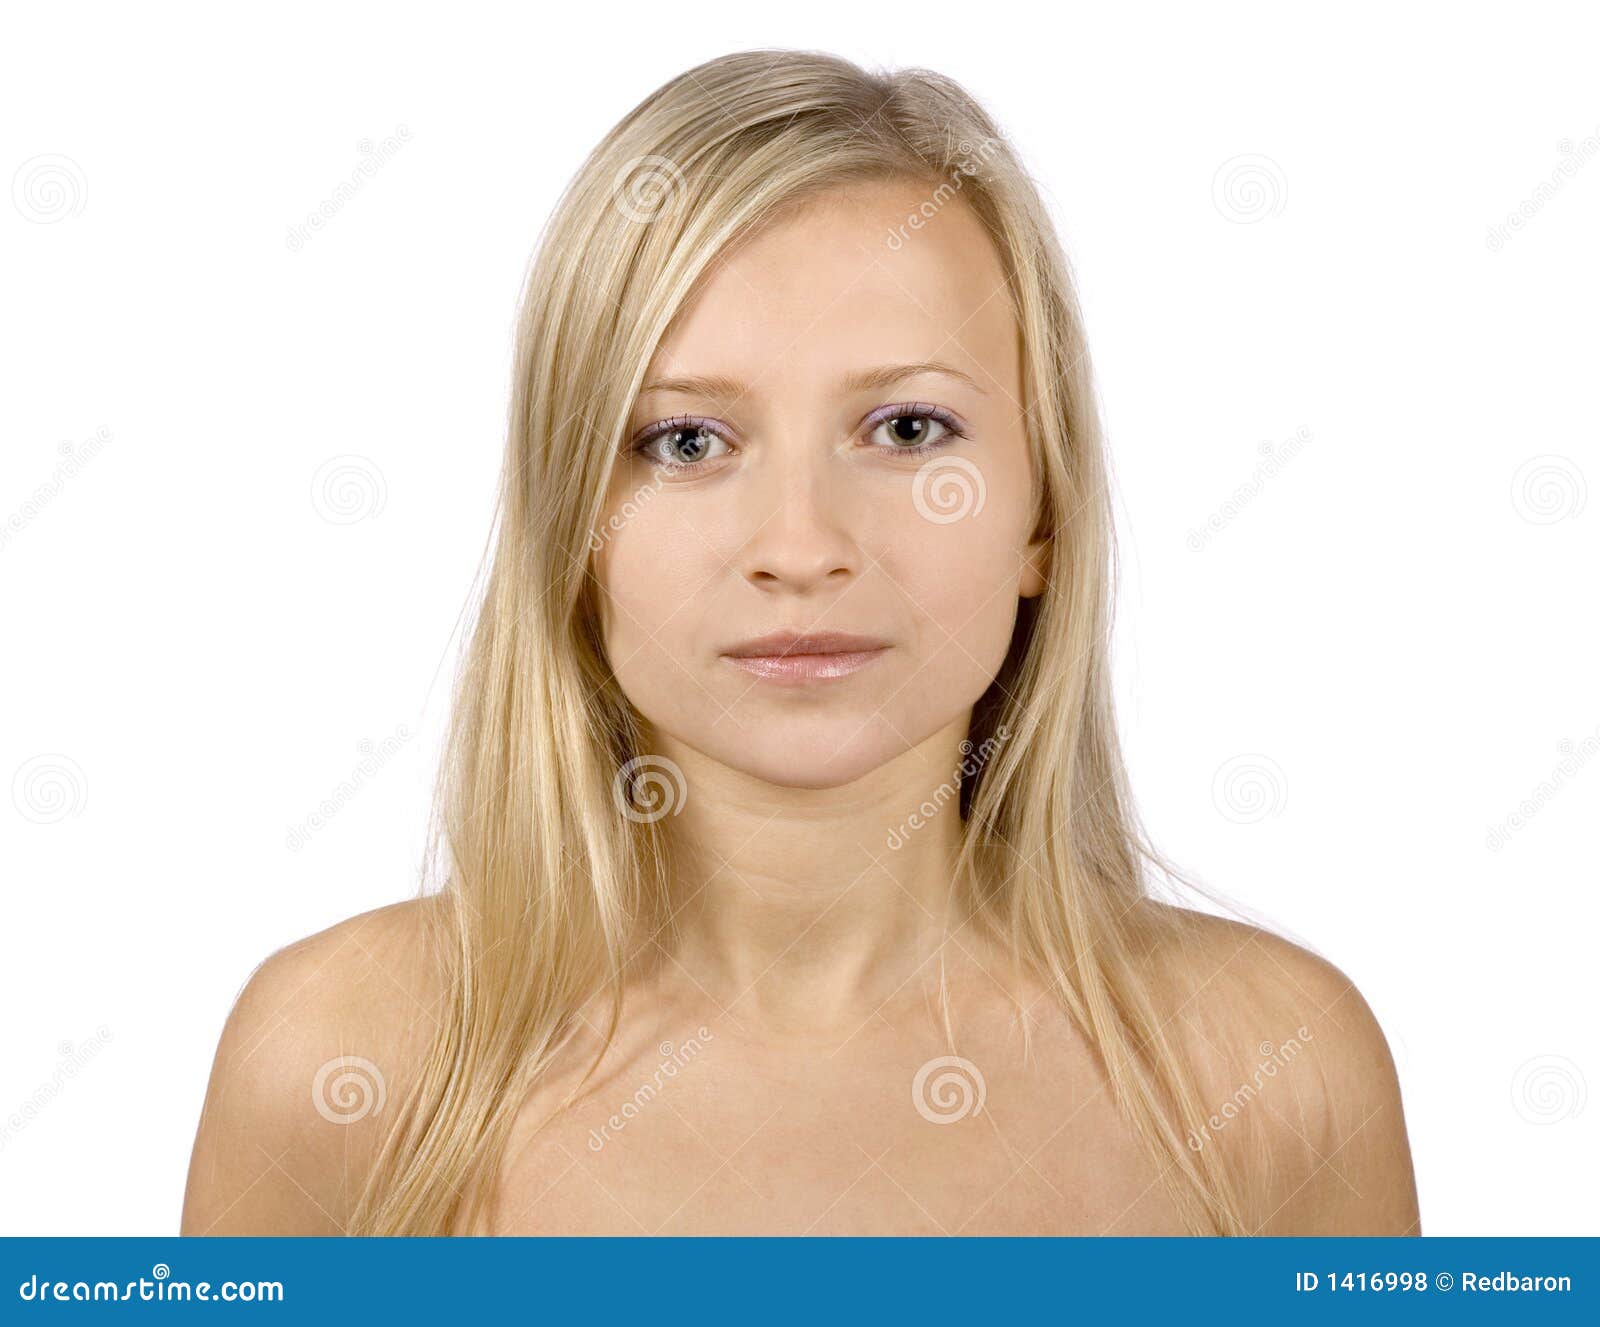 face of young blonde woman